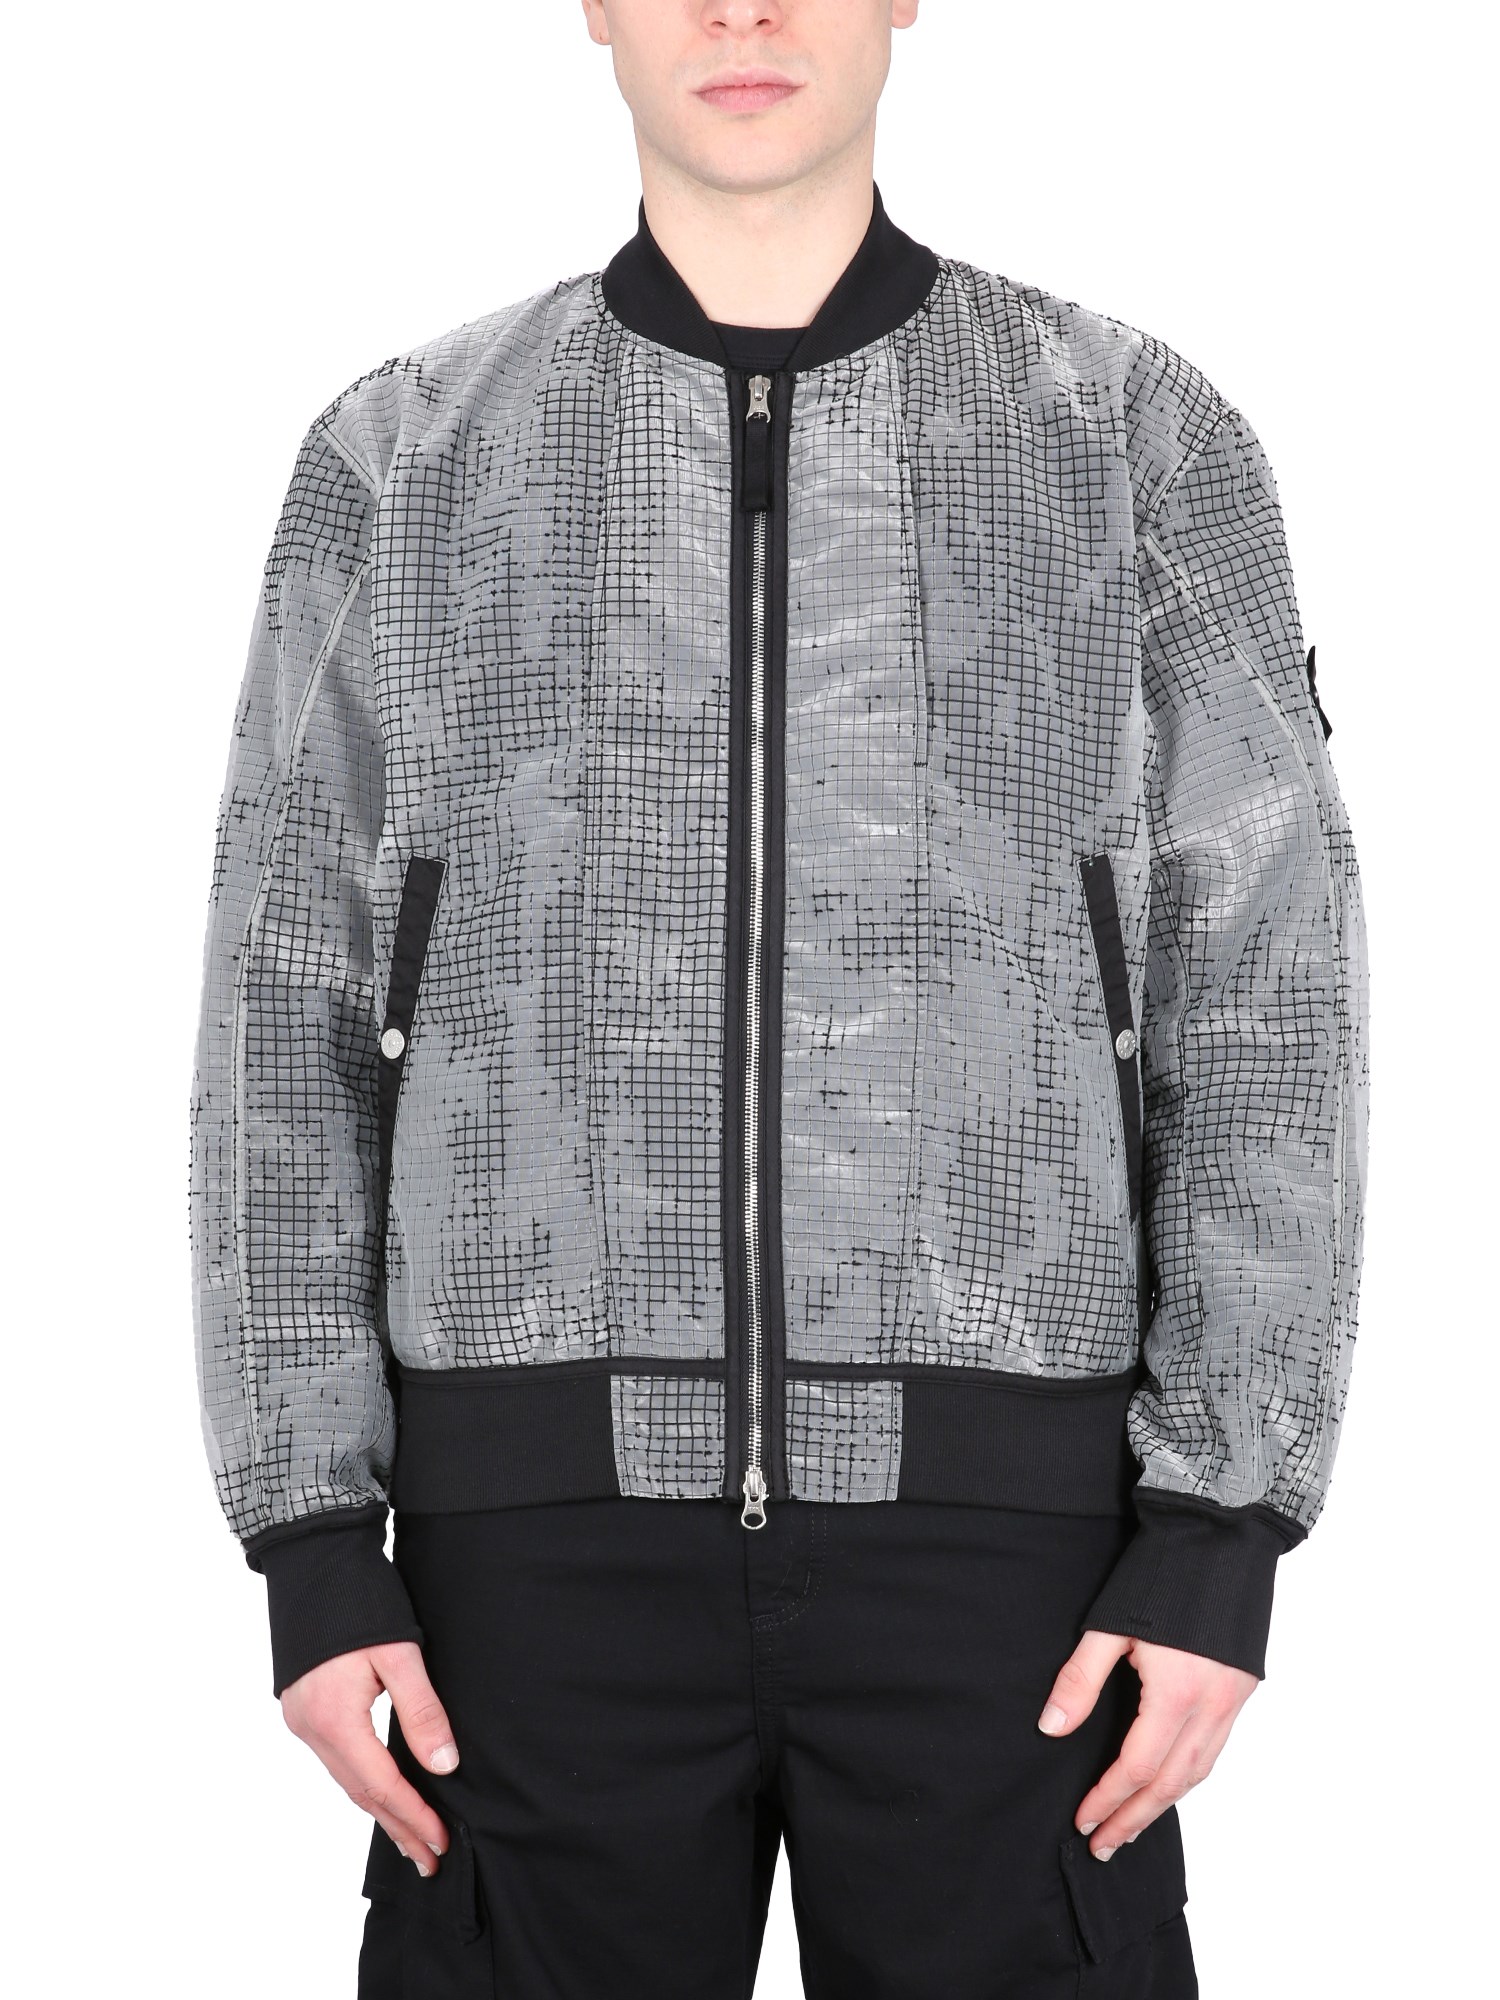 stone island shadow project distorted bomber